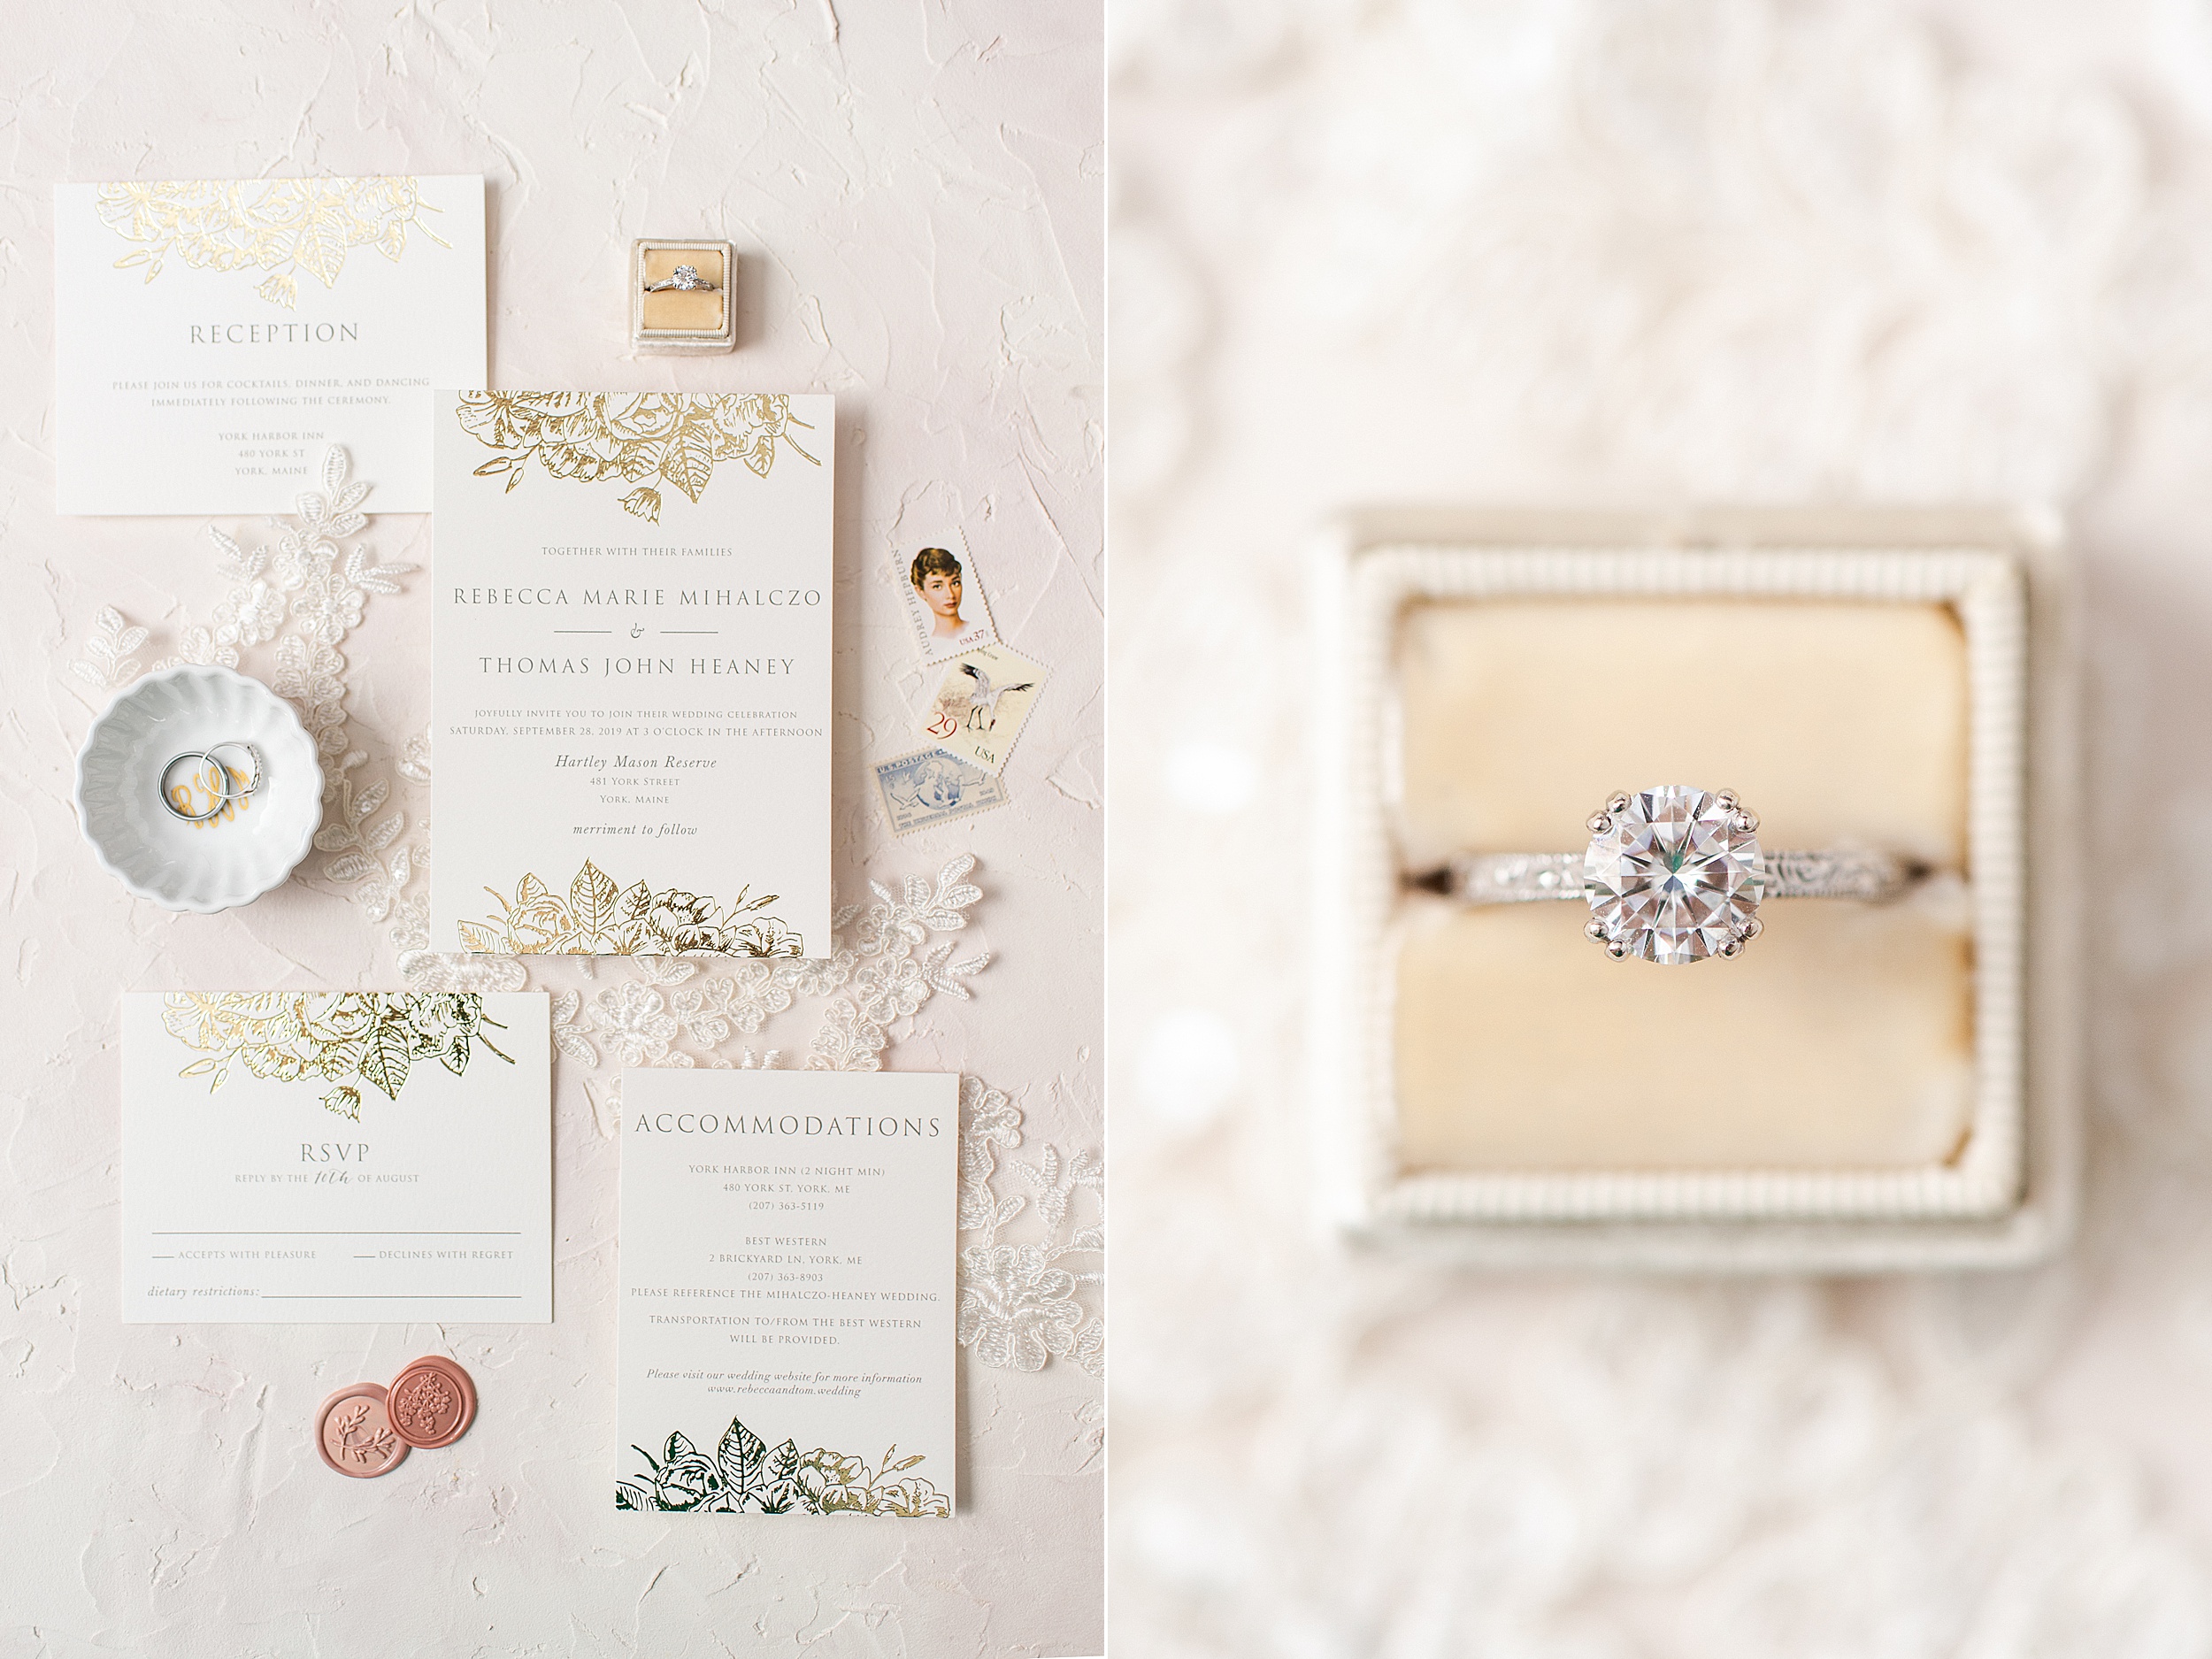 invitation suite and engagement ring styled bridal flat lay with lace and mrs box